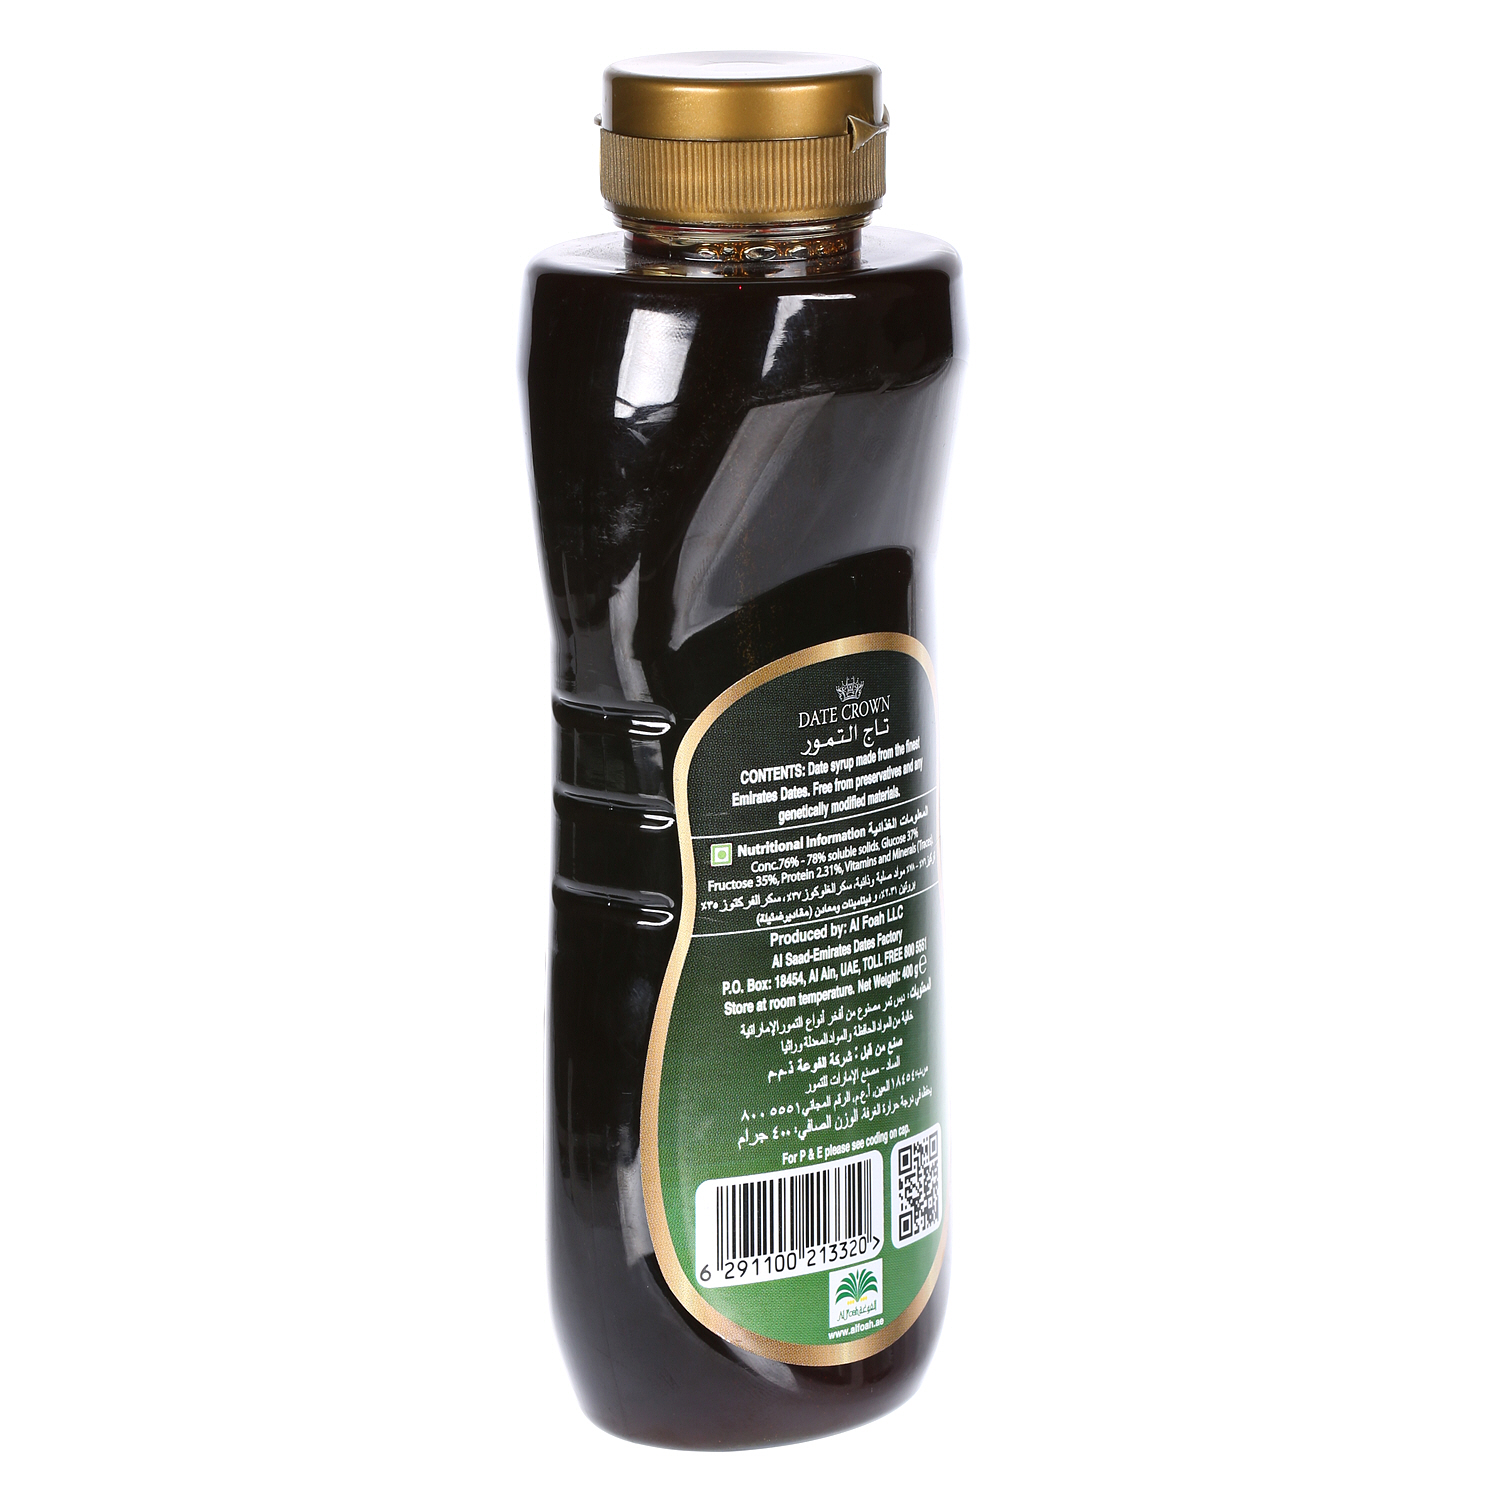 Date Crown Syrup 400 g